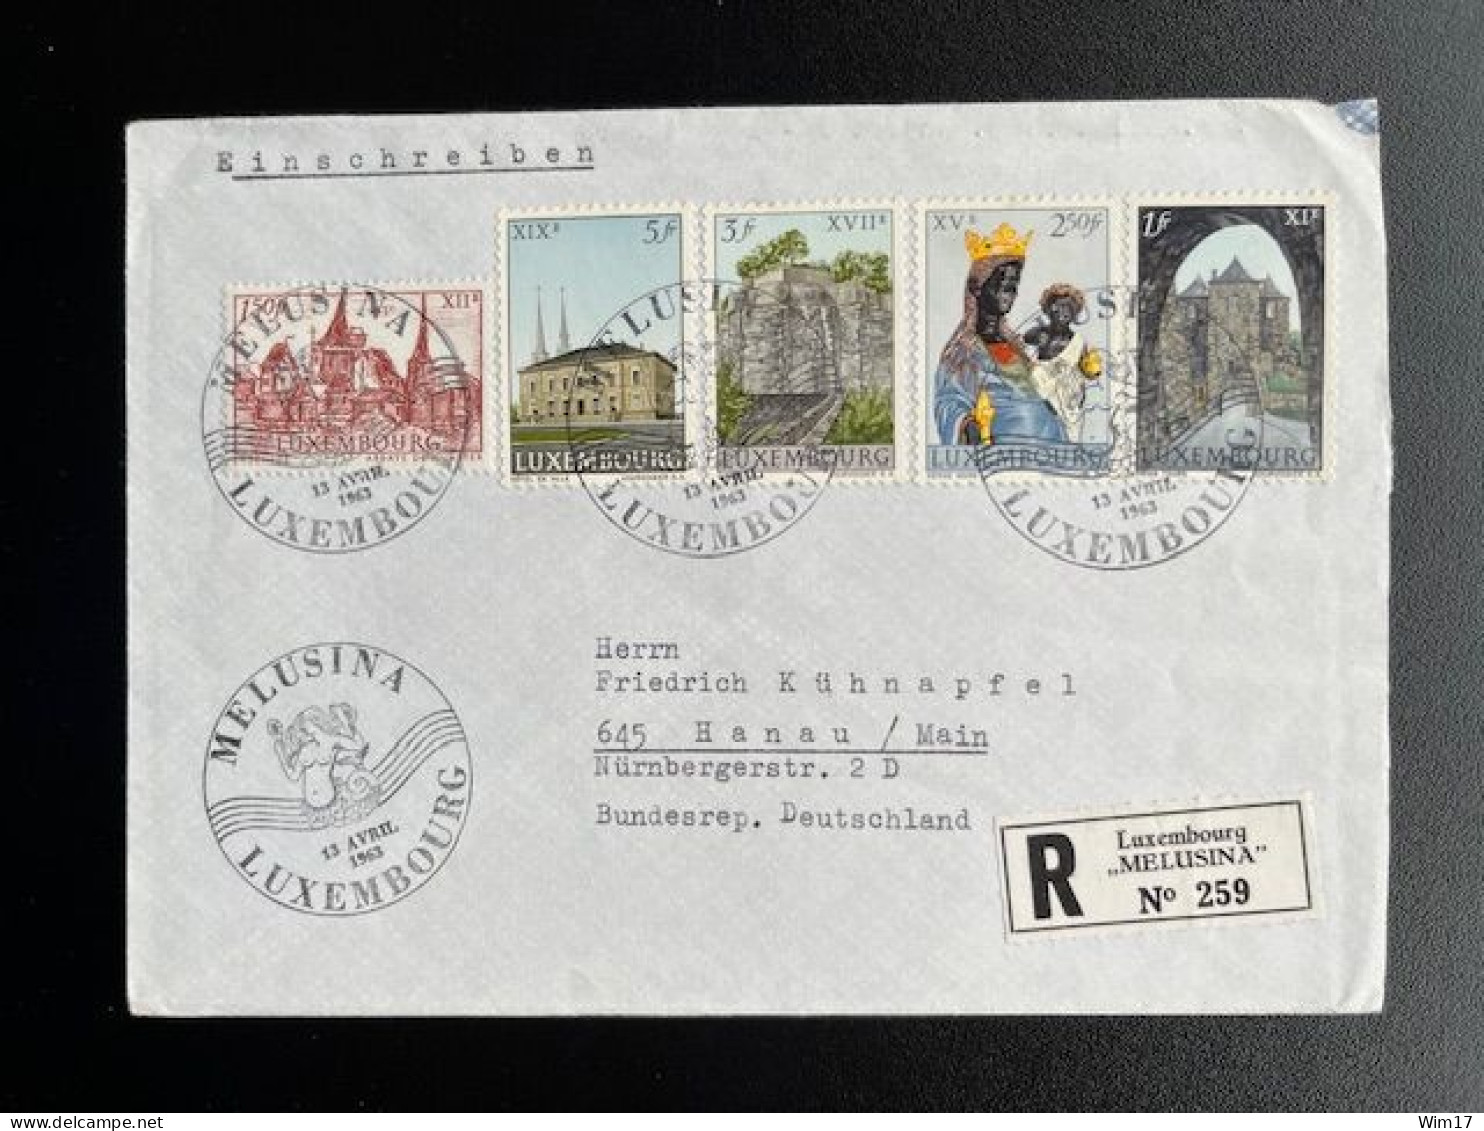 LUXEMBURG 1963 REGISTERED LETTER LUXEMBOURG MELUSINA EXHIBITION TO HANAU 13-04-1963 - Lettres & Documents